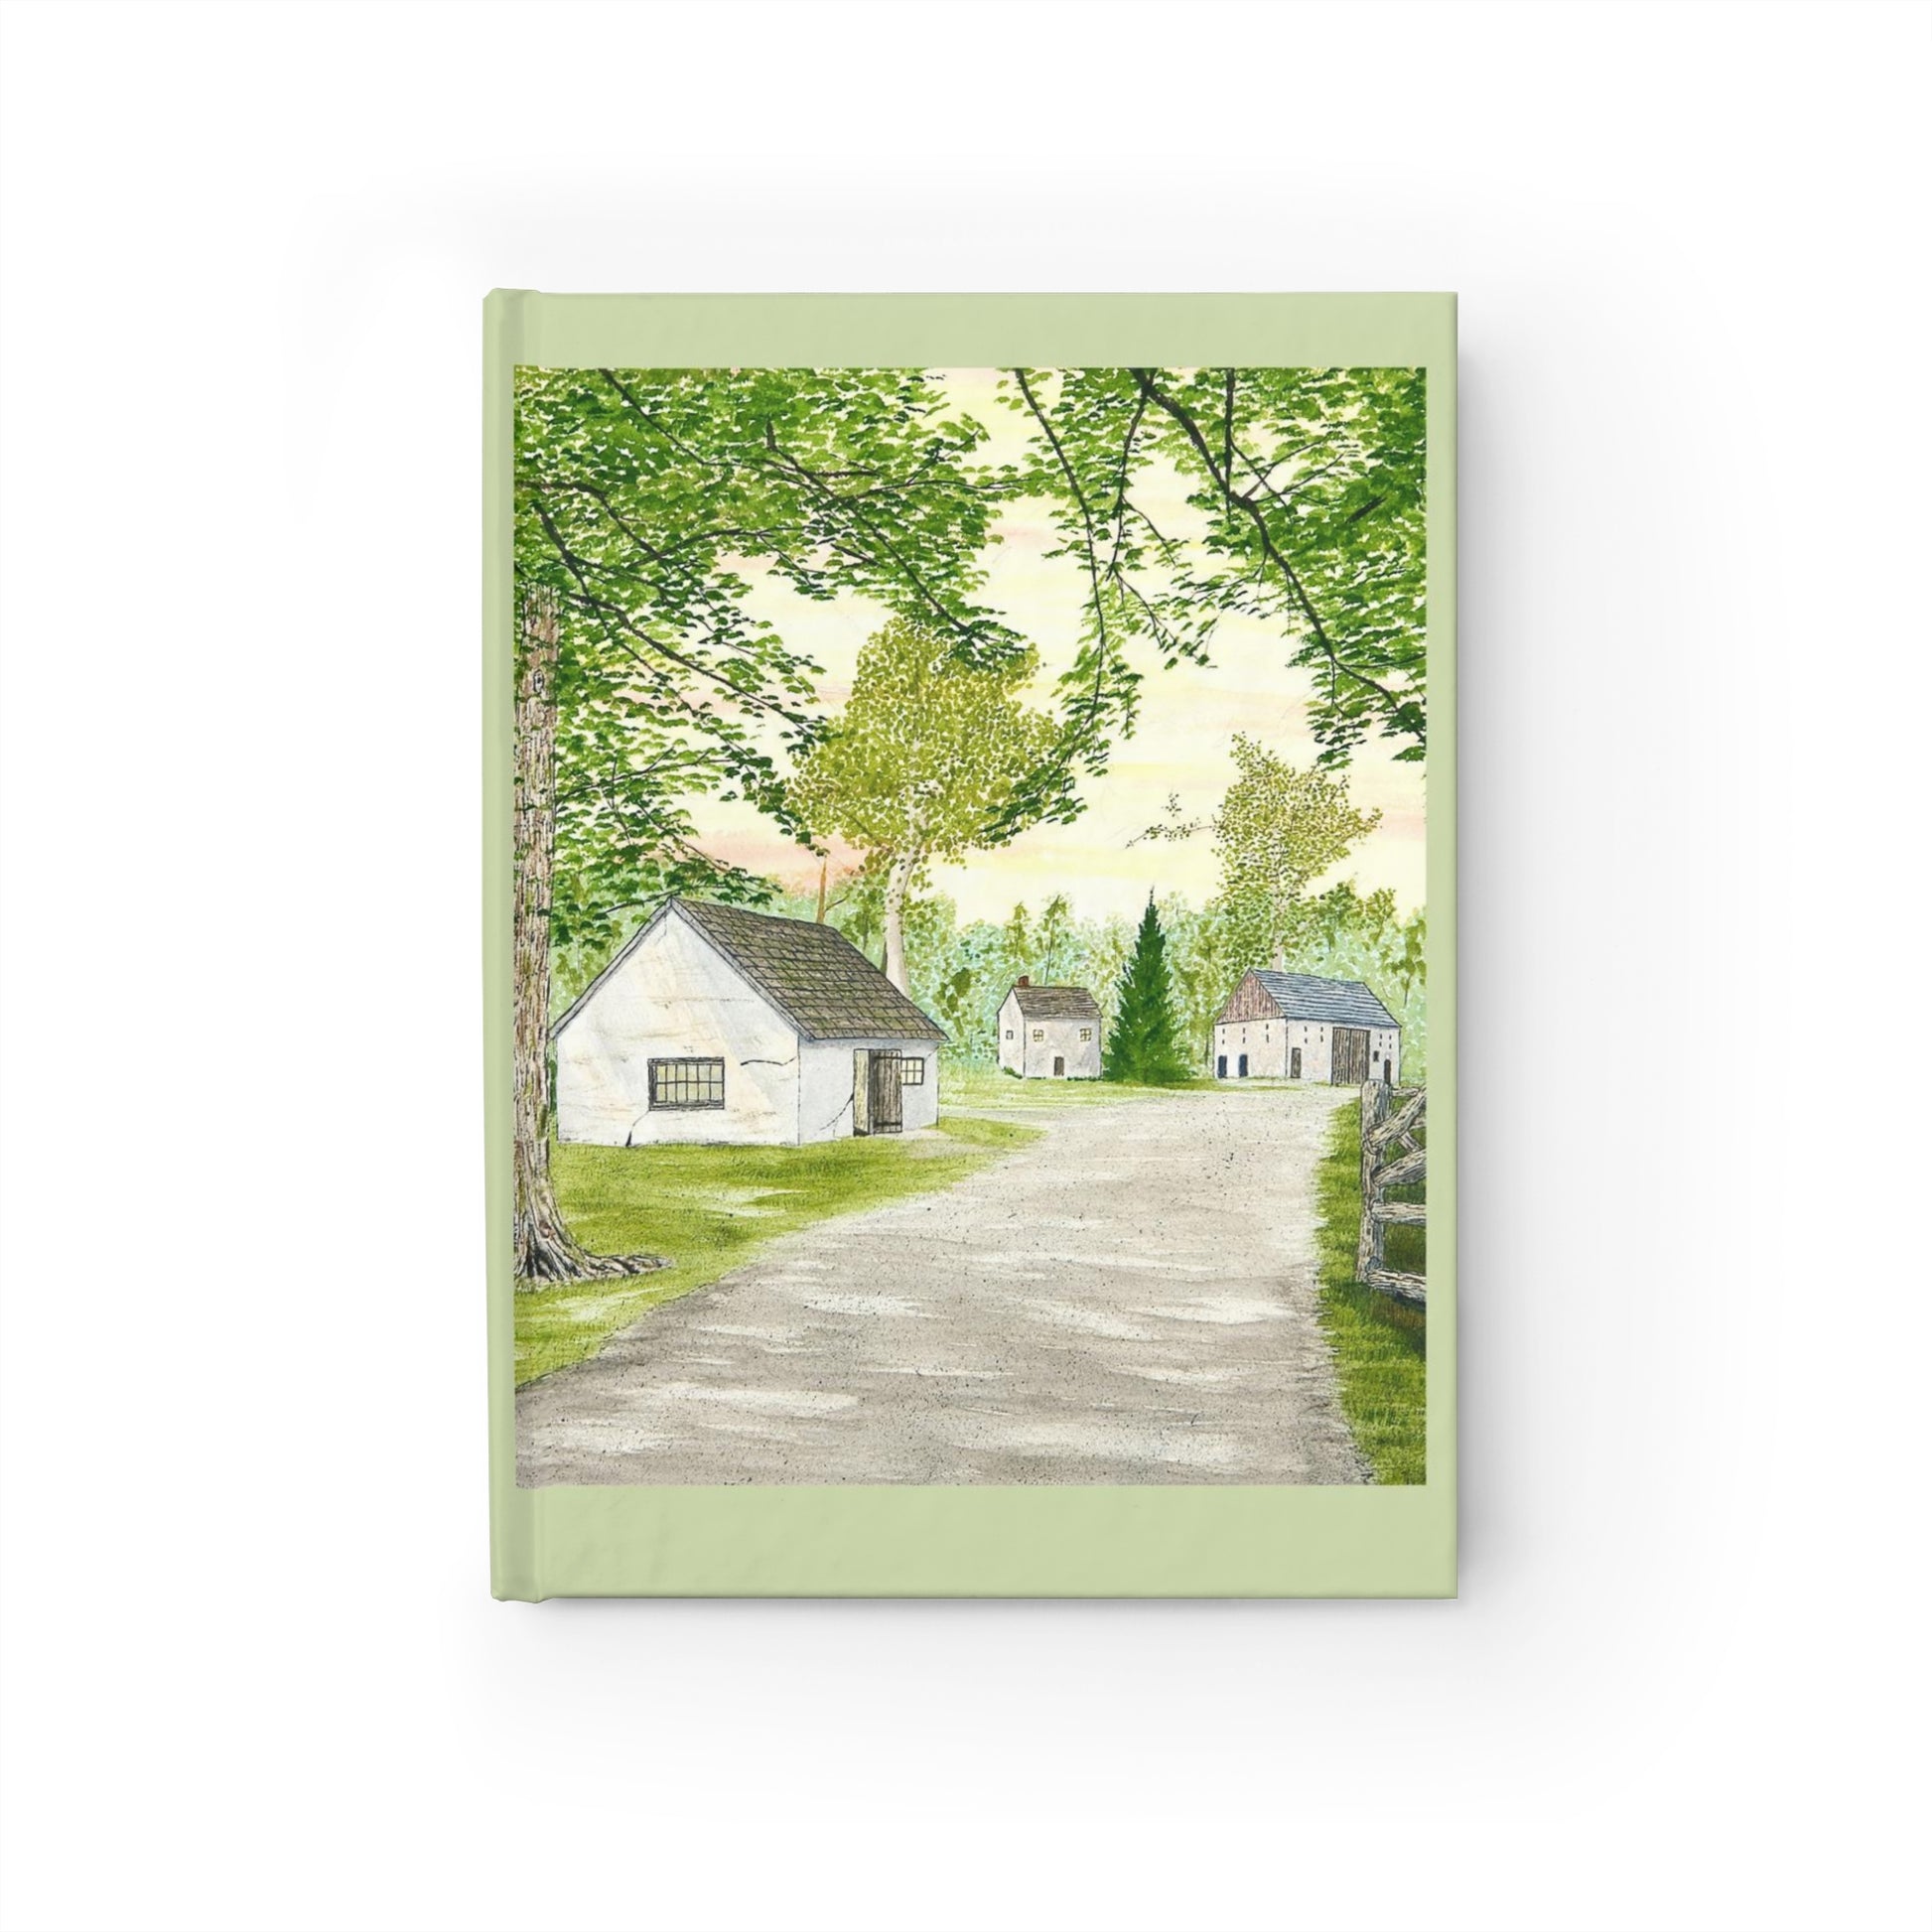 The Country Lane and Fence Lined Pate Journal is perfect as your personal journal or for keeping notes on any topic. The journal features a reproduction of a watercolor painting by artist Lee M. Buchanan.